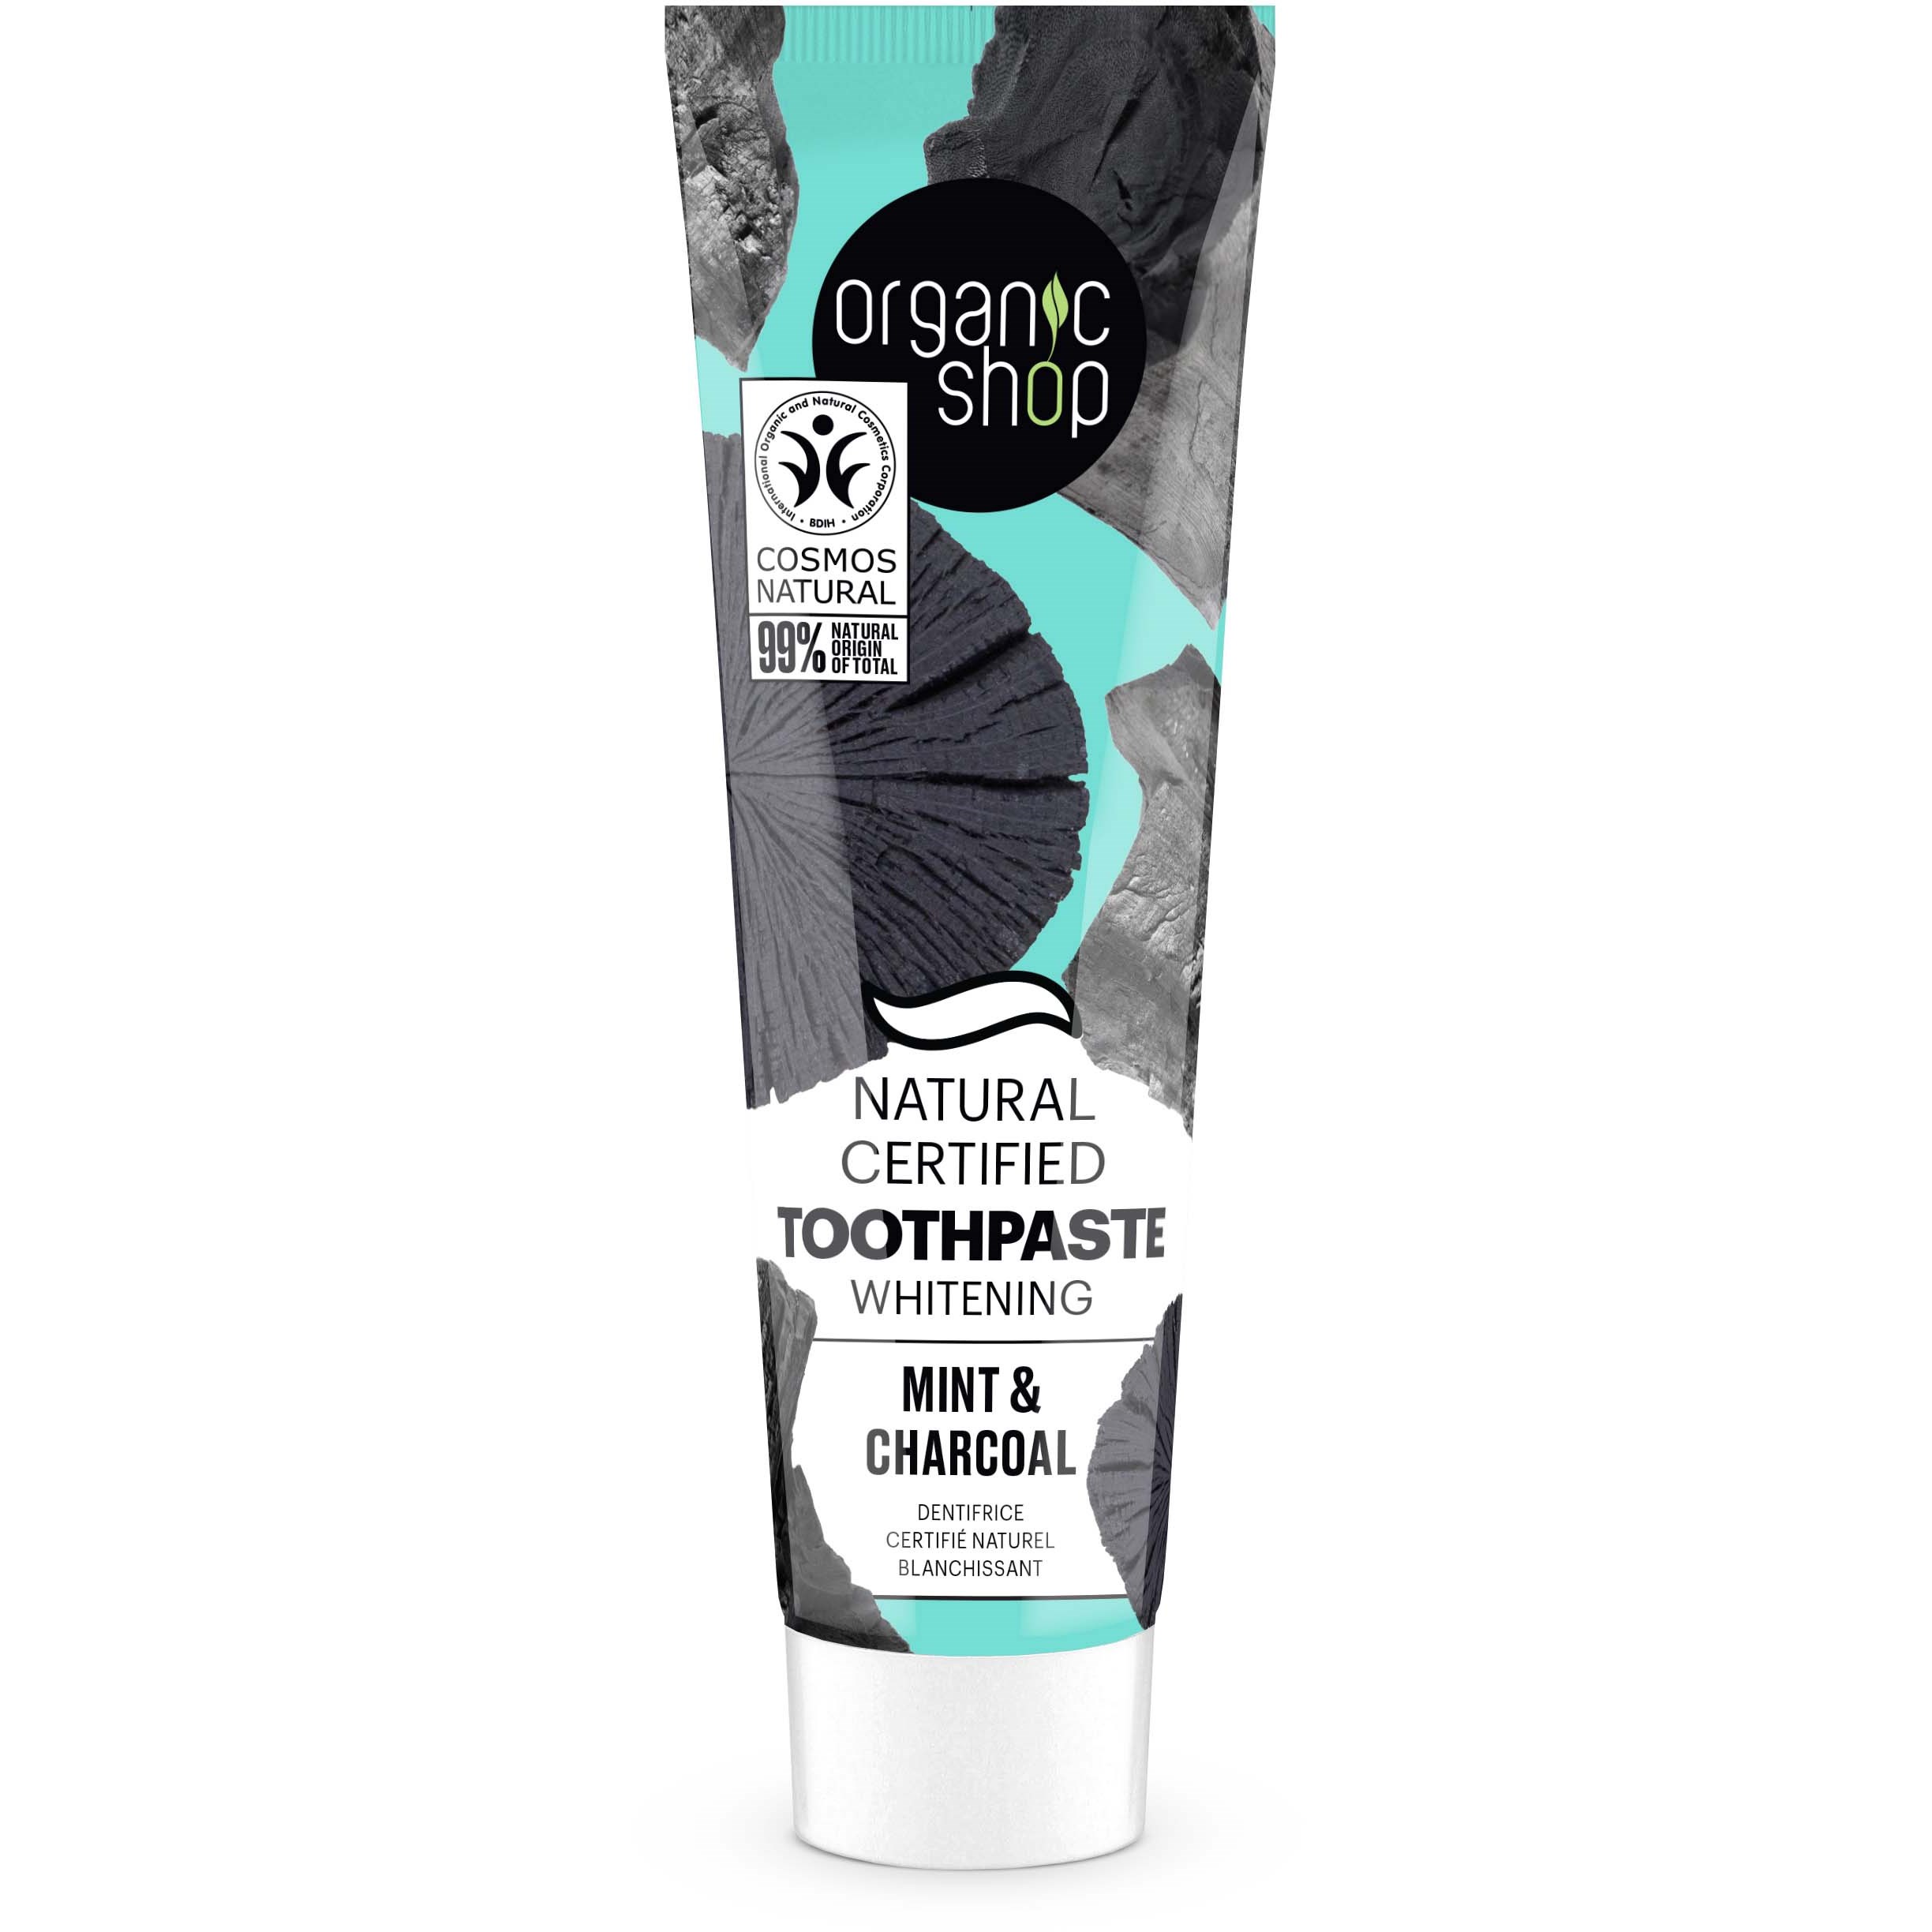 Organic Shop Toothpaste Whitening Mint & Charcoal 100 g